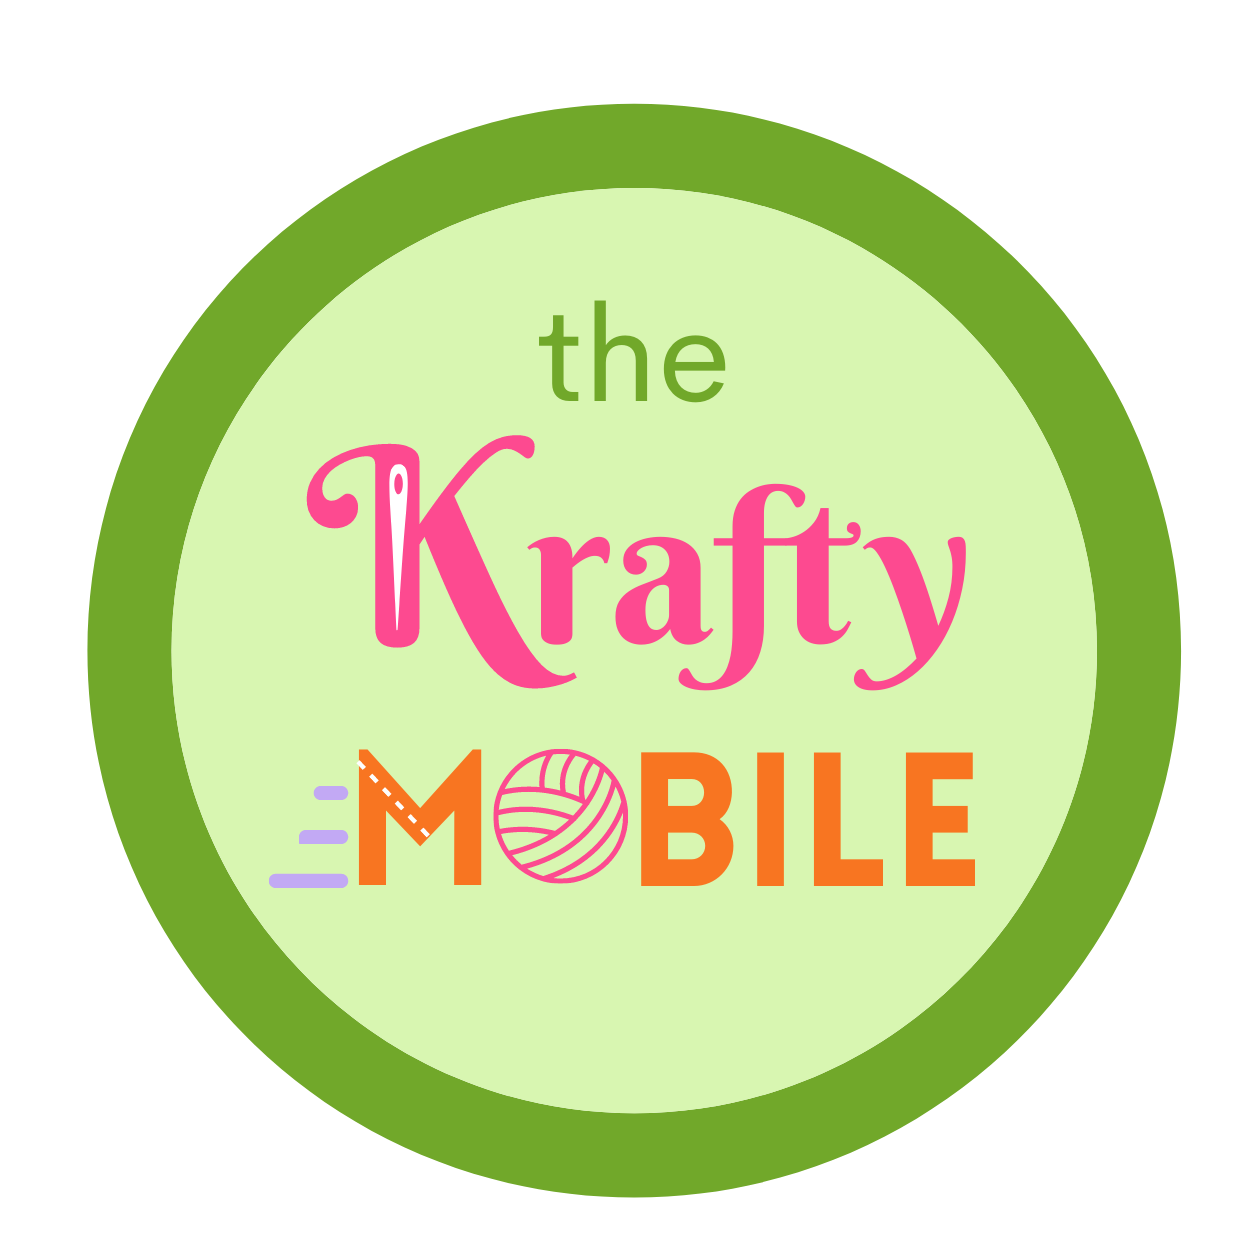 Welcome to The Krafty Mobile, the home of crafty ideas and quality needlecraft and crafting supplies.